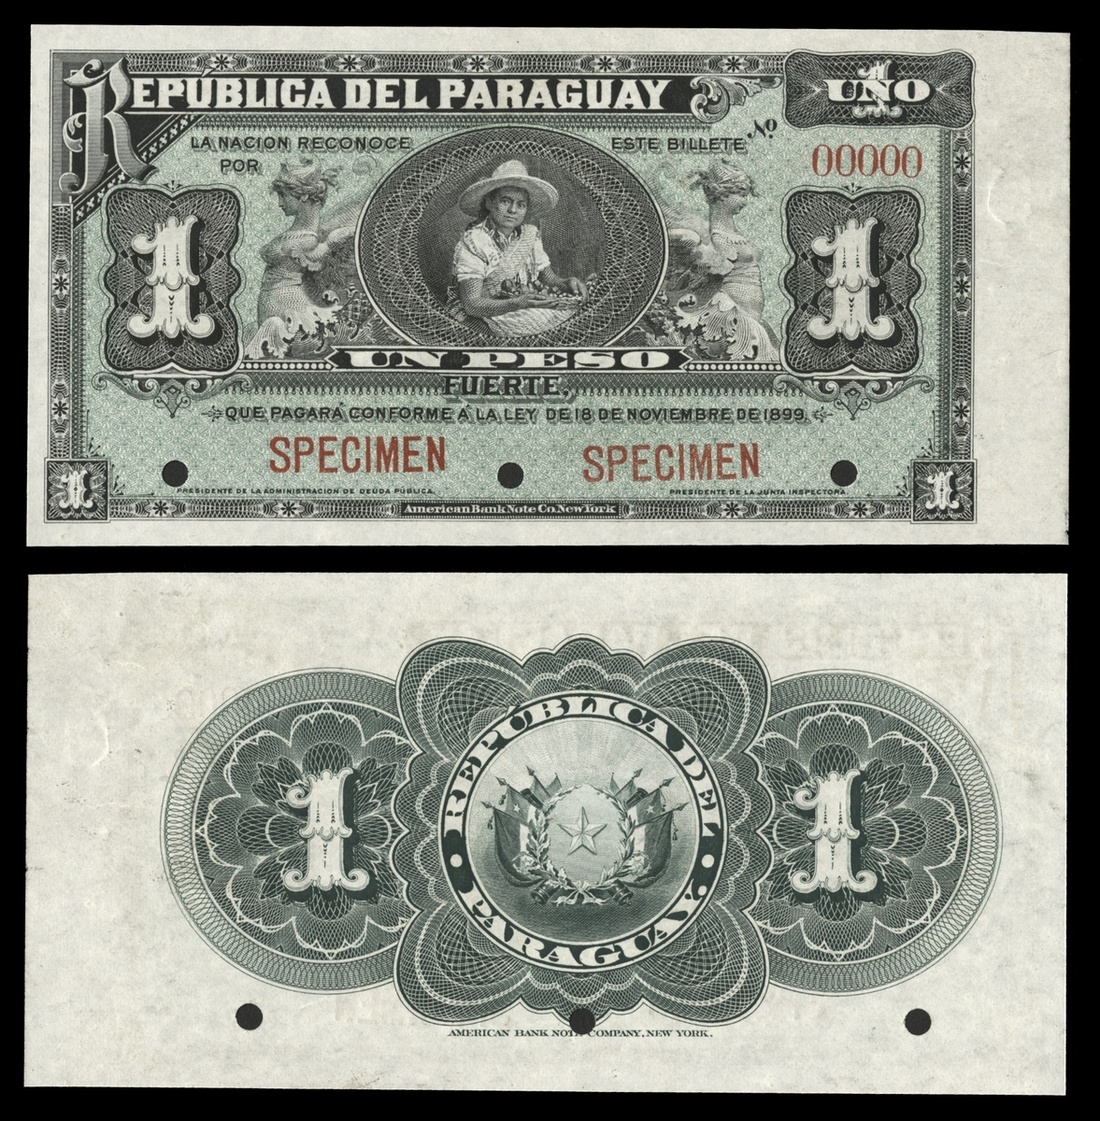 Paraguay. Republica del Paraguay. 1 Peso. 1899. P-96s. Black on green. Woman In straw hat with...